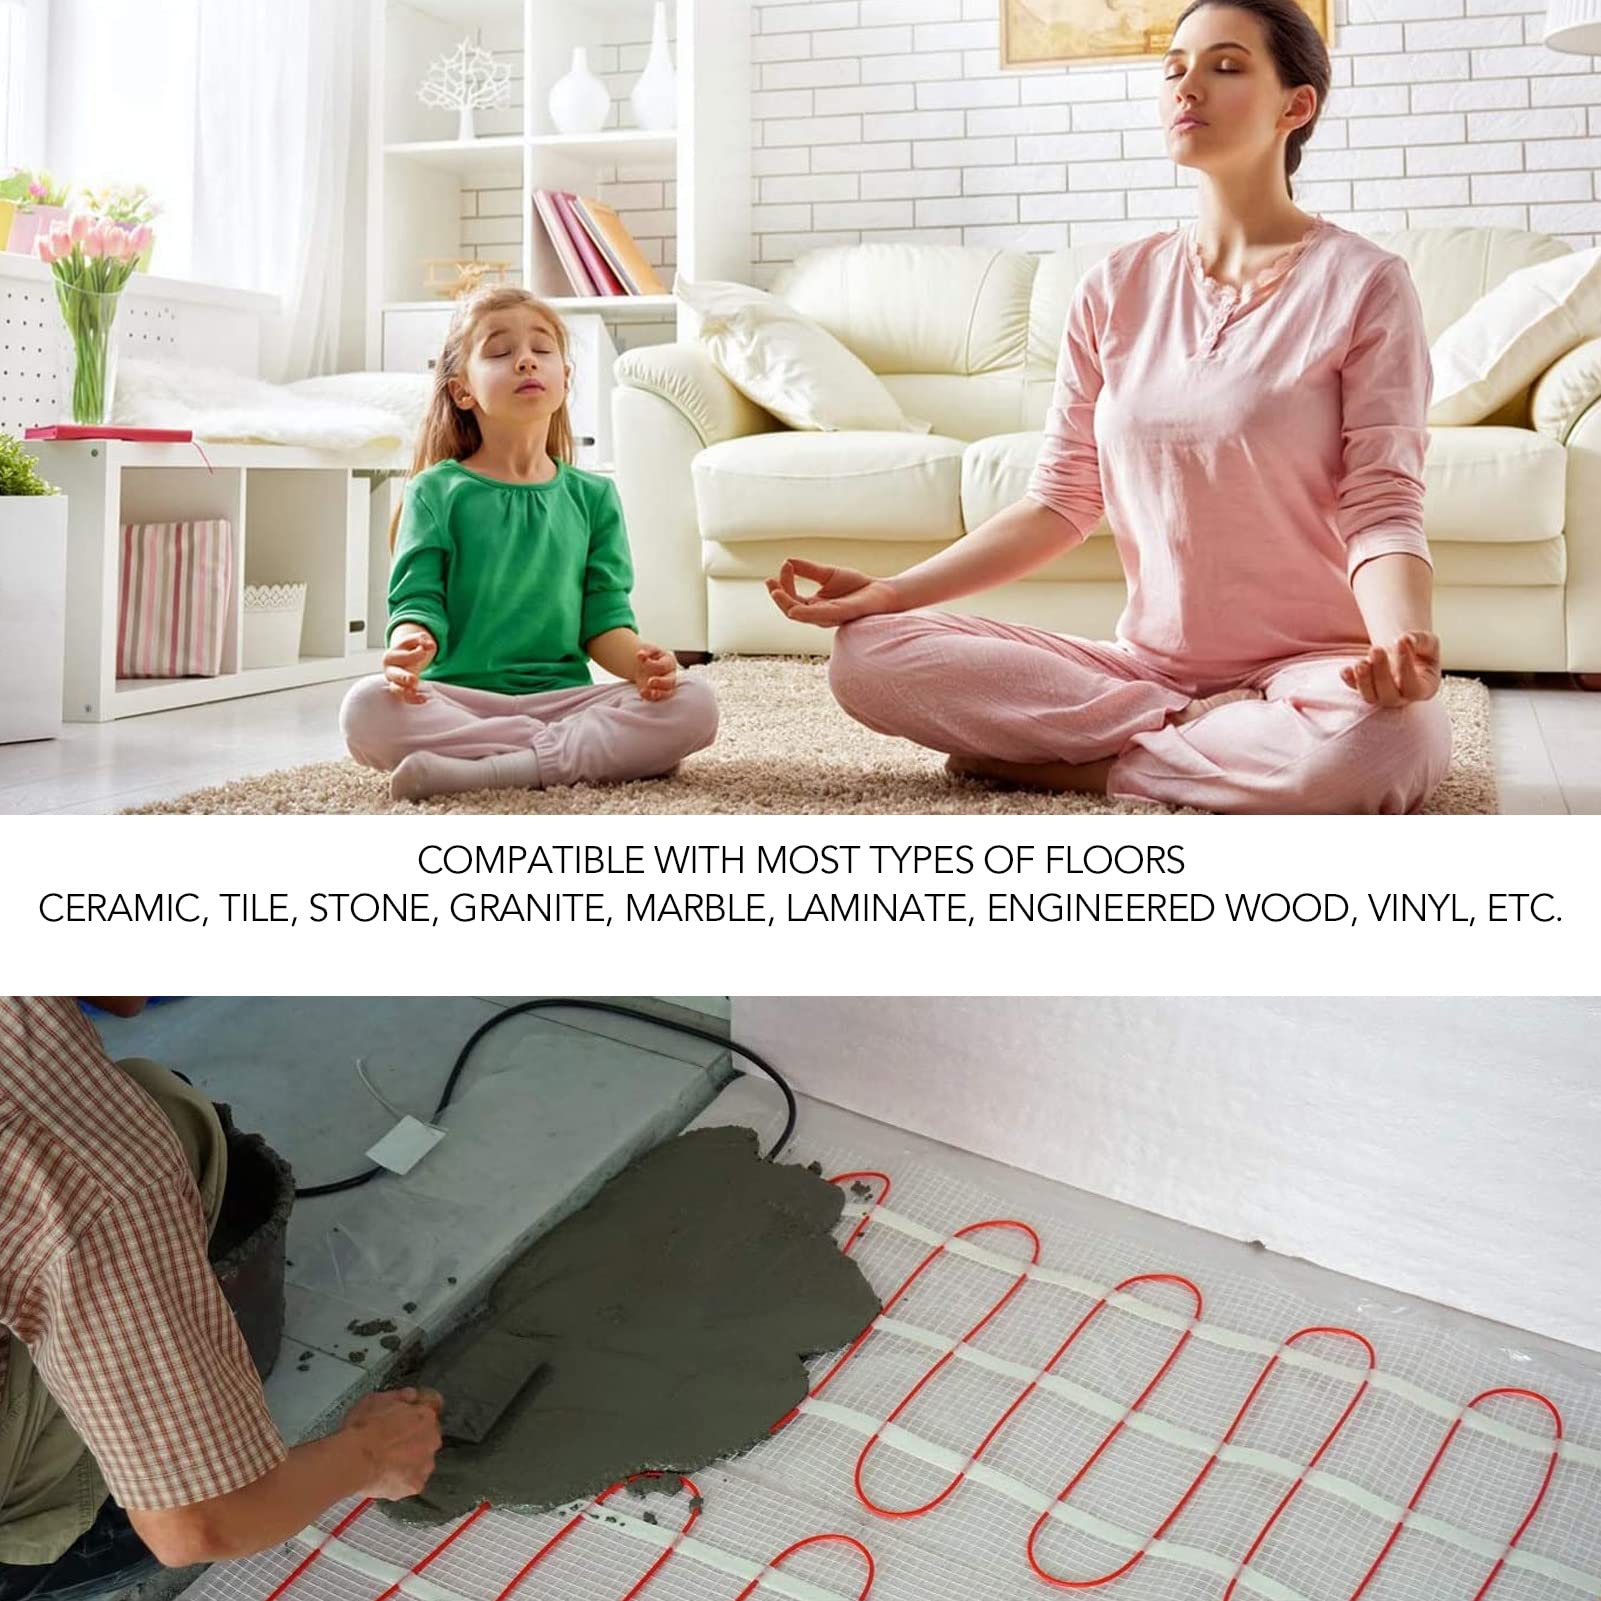 Electric Underfloor Heating Mat, Efficient Warming Continuous Heat Self Adhesive Underfloor Heating Mat 1.5㎡ PVC Protective Sleeve 180W for Floors (220-240V)